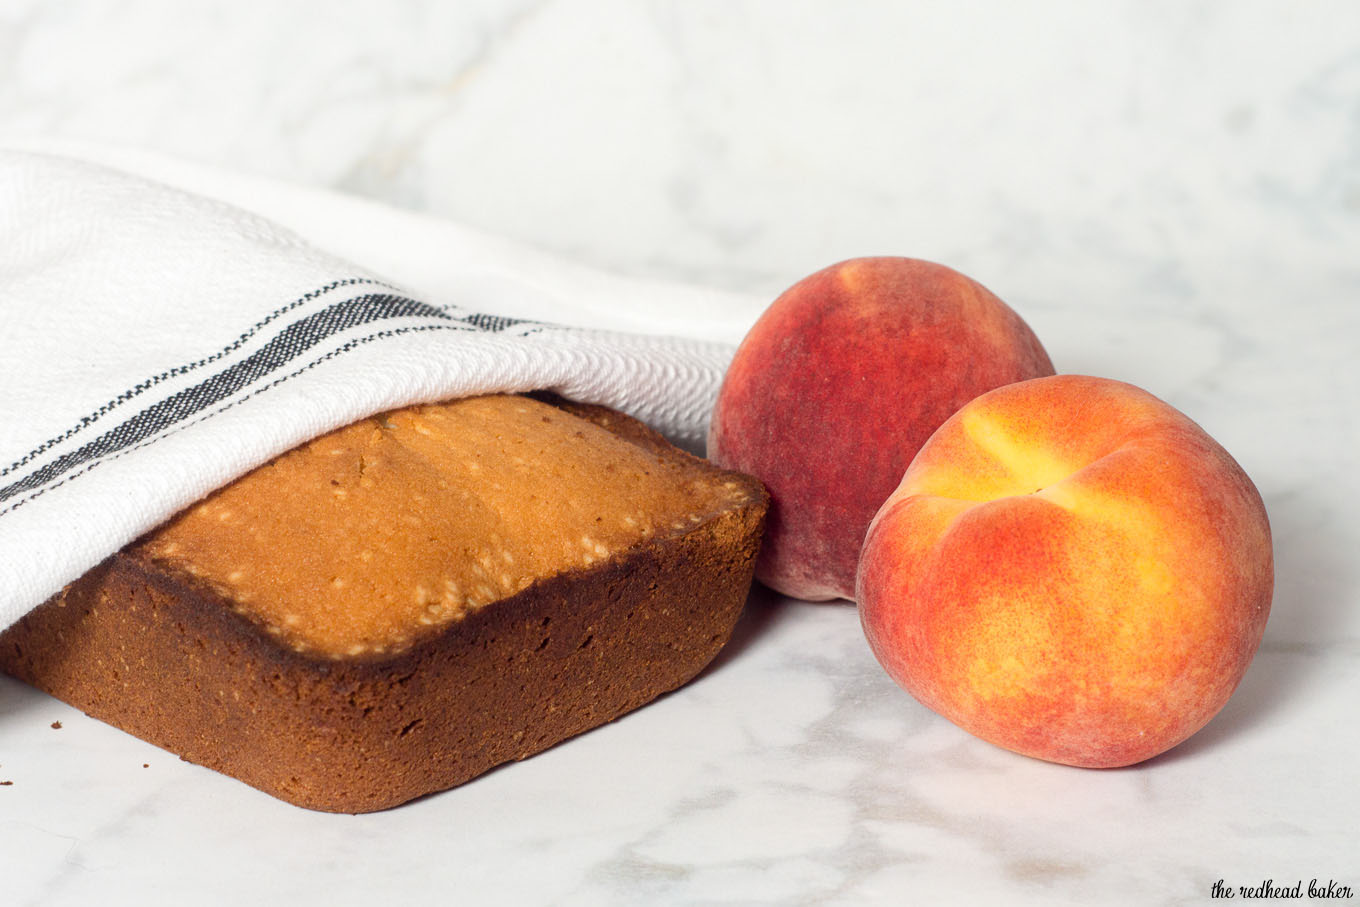 Grilled pound cake with peaches and mascarpone is a delicious summer dessert made right on the grill, the perfect ending to your cookout. #ProgressiveEats